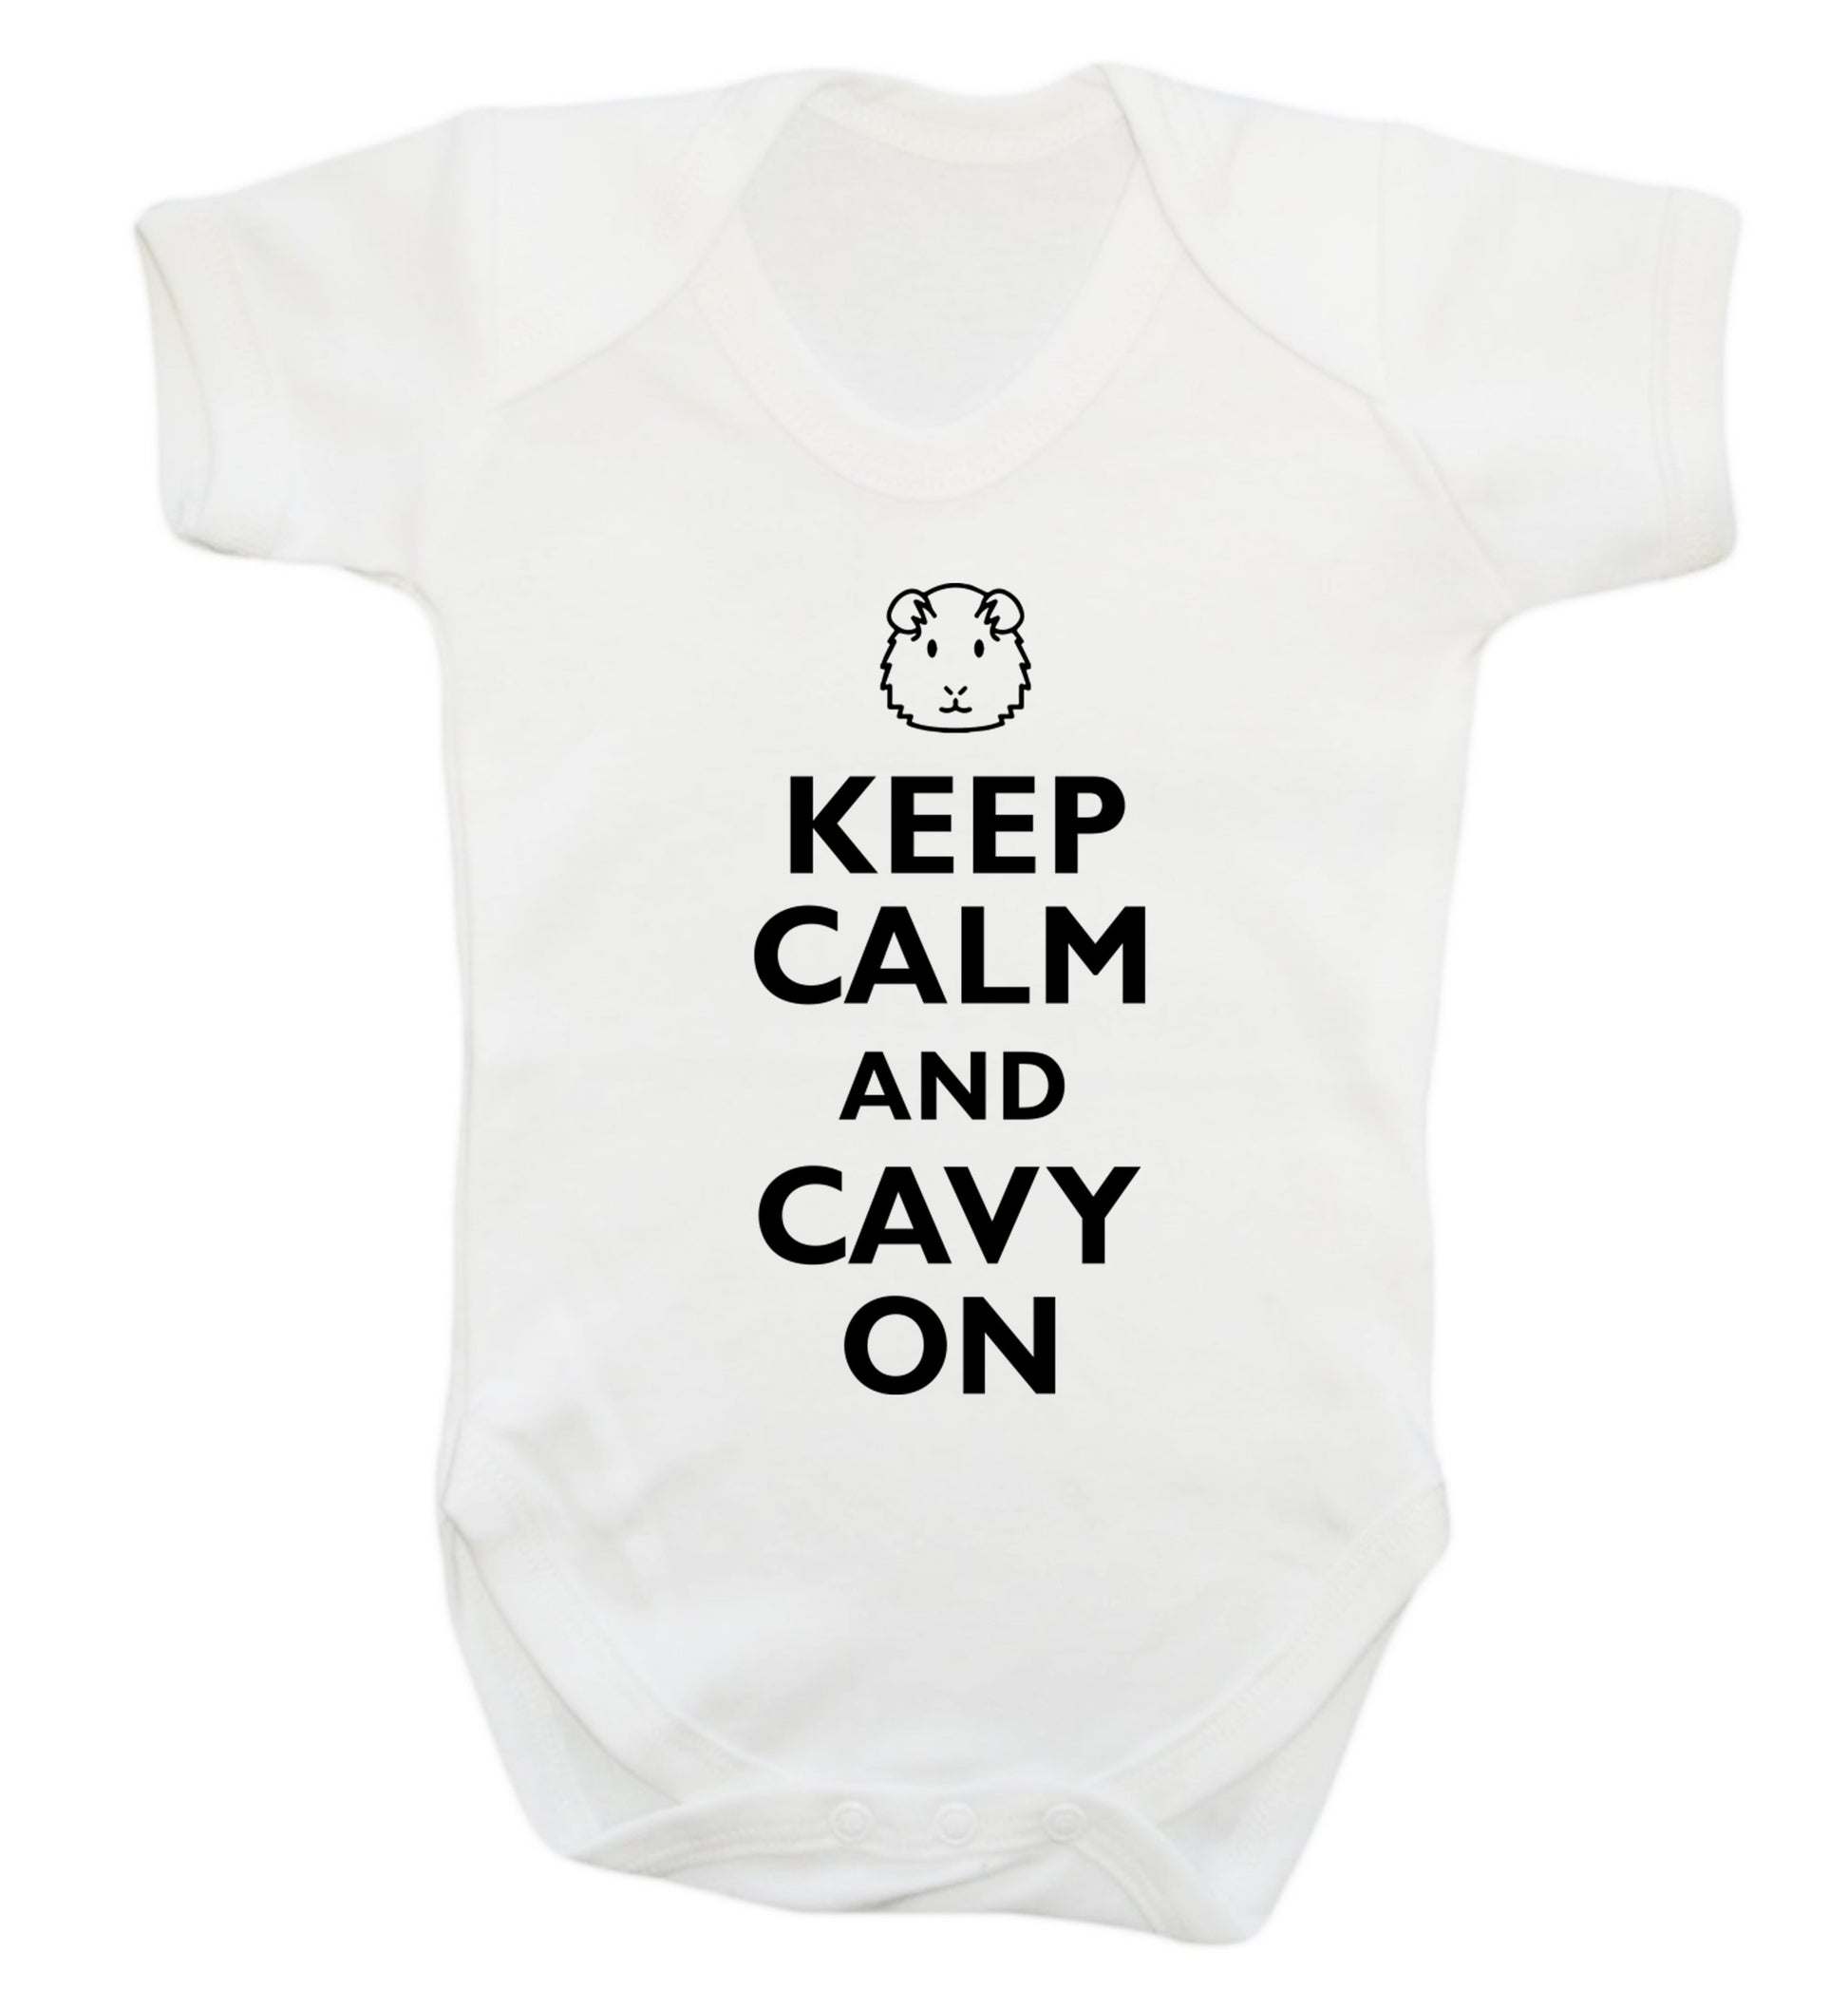 Keep calm and cavvy on Baby Vest white 18-24 months